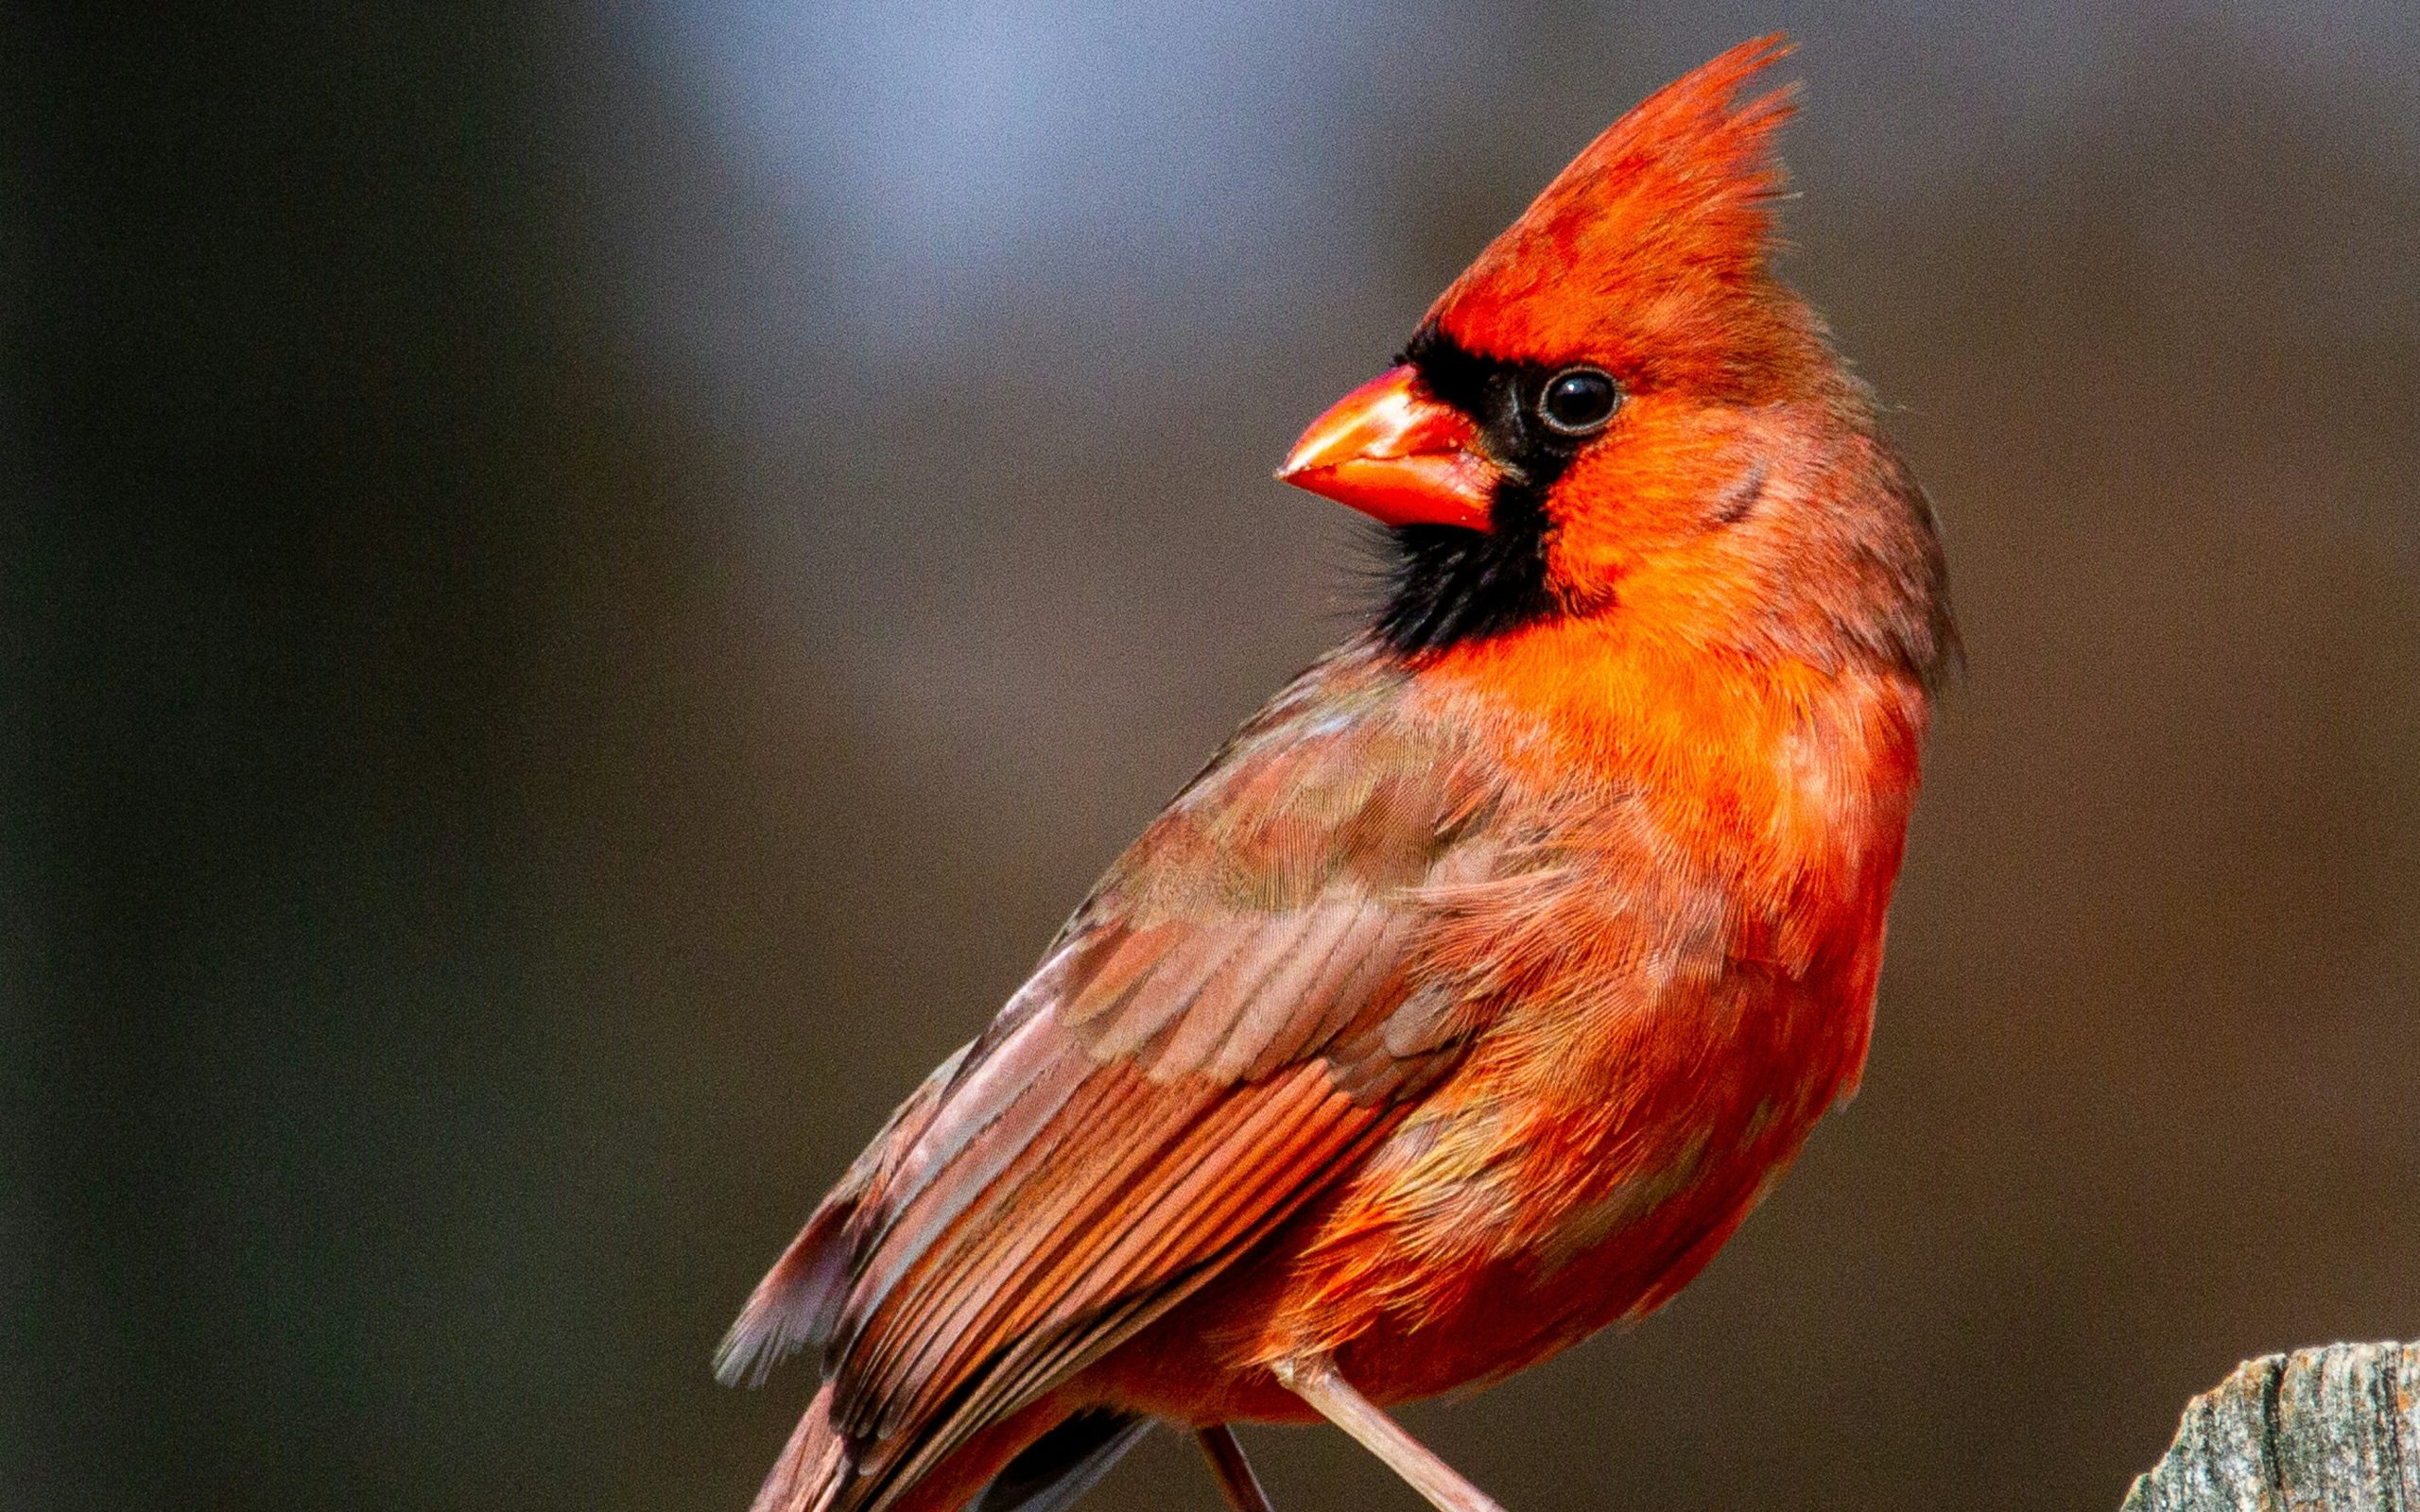 Do Cardinals Appear When Angels are Near?